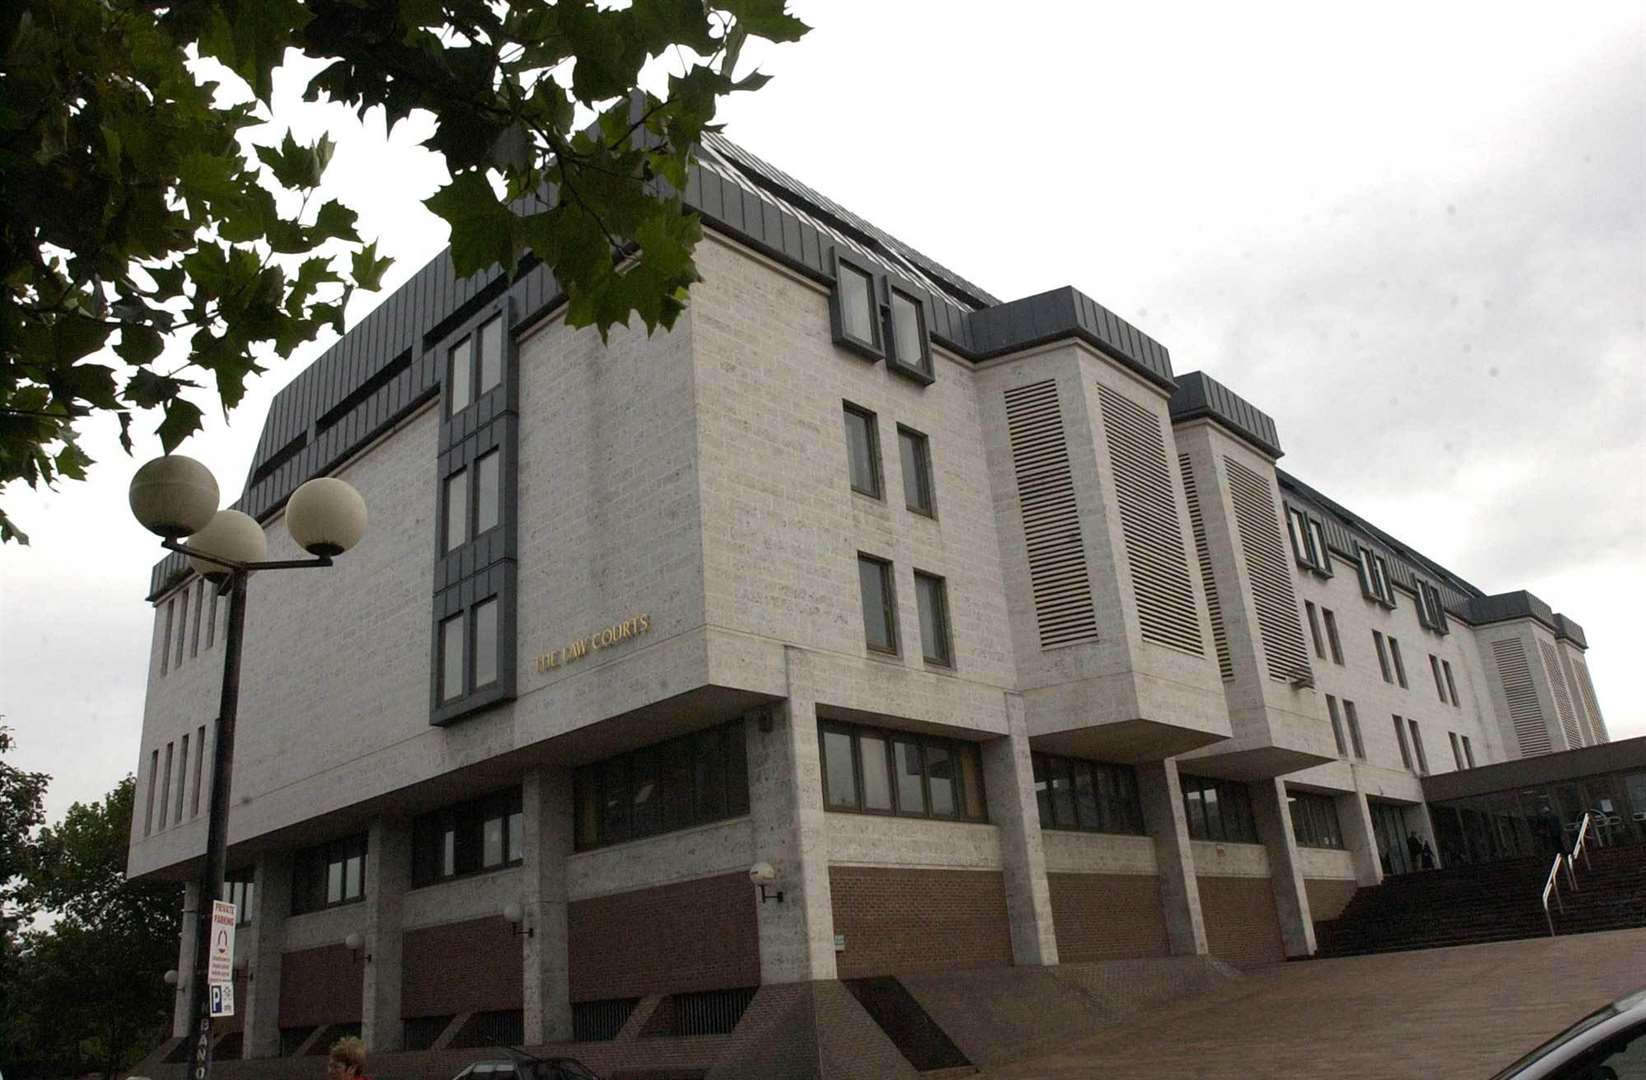 Nelson Ripley was sentenced at Maidstone Crown Court and Archie Ripley and Henry Ripley will be sentenced at the same court at a later date